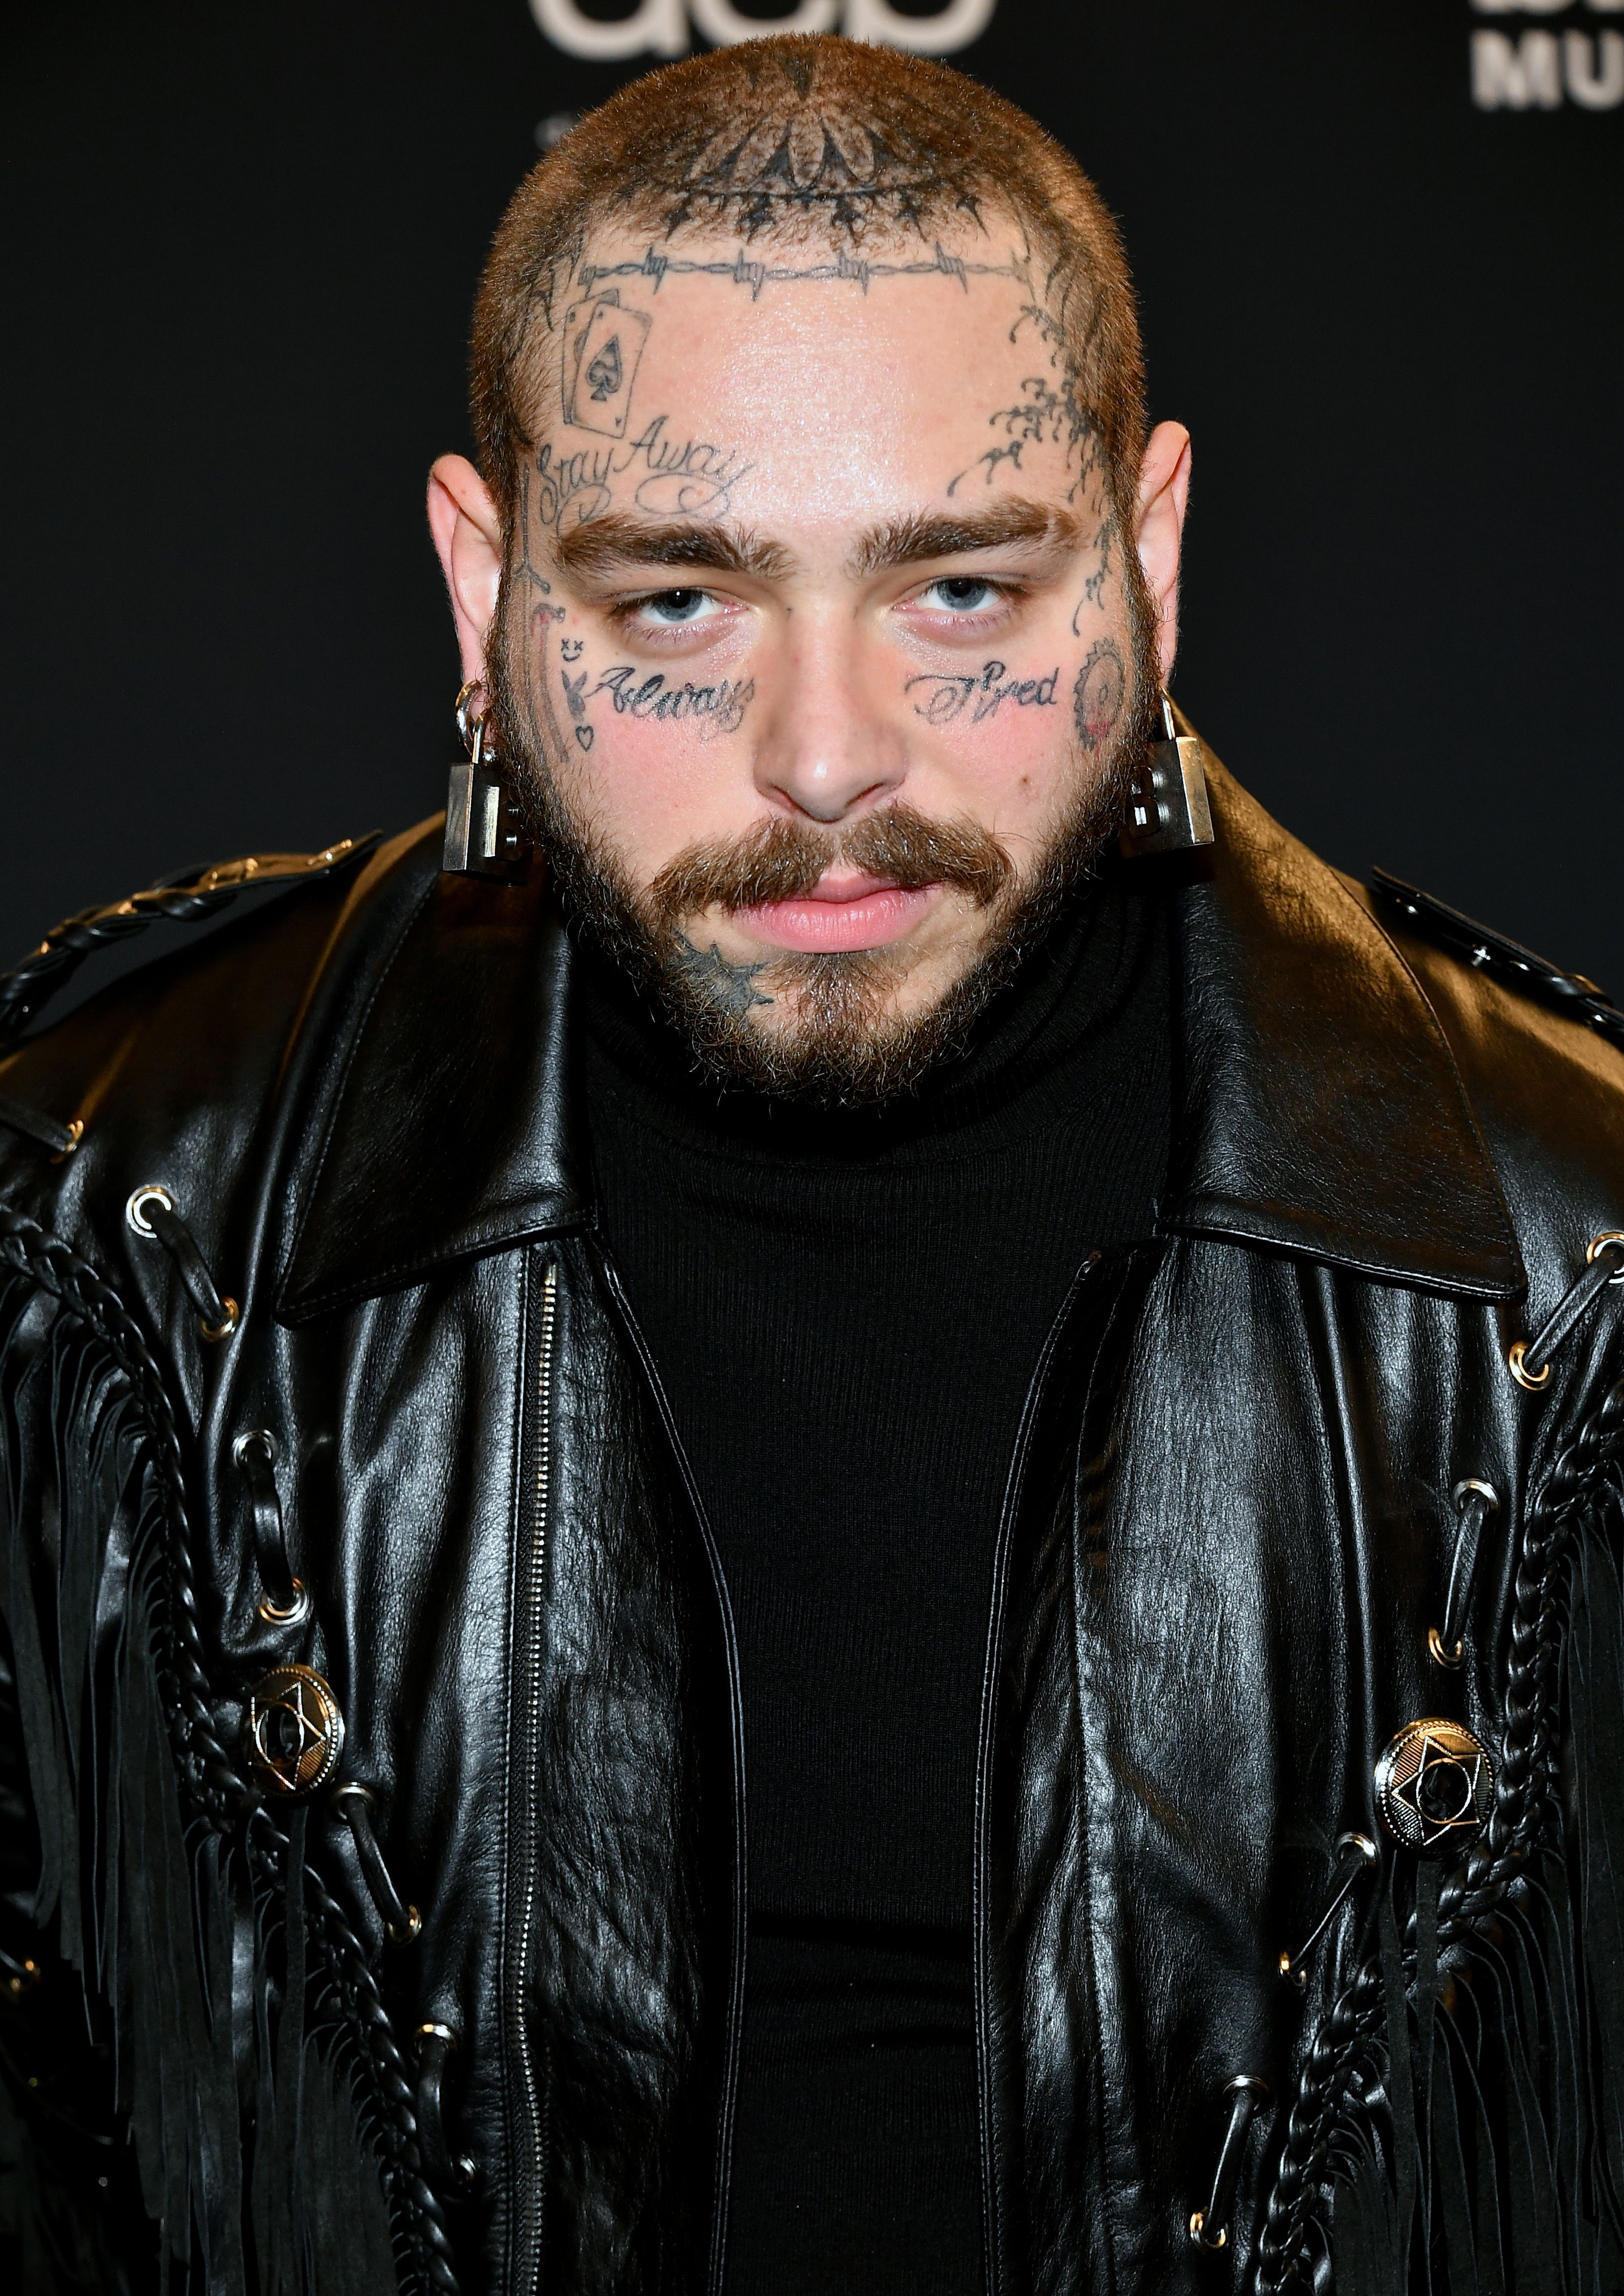 Post malone face tattoo says